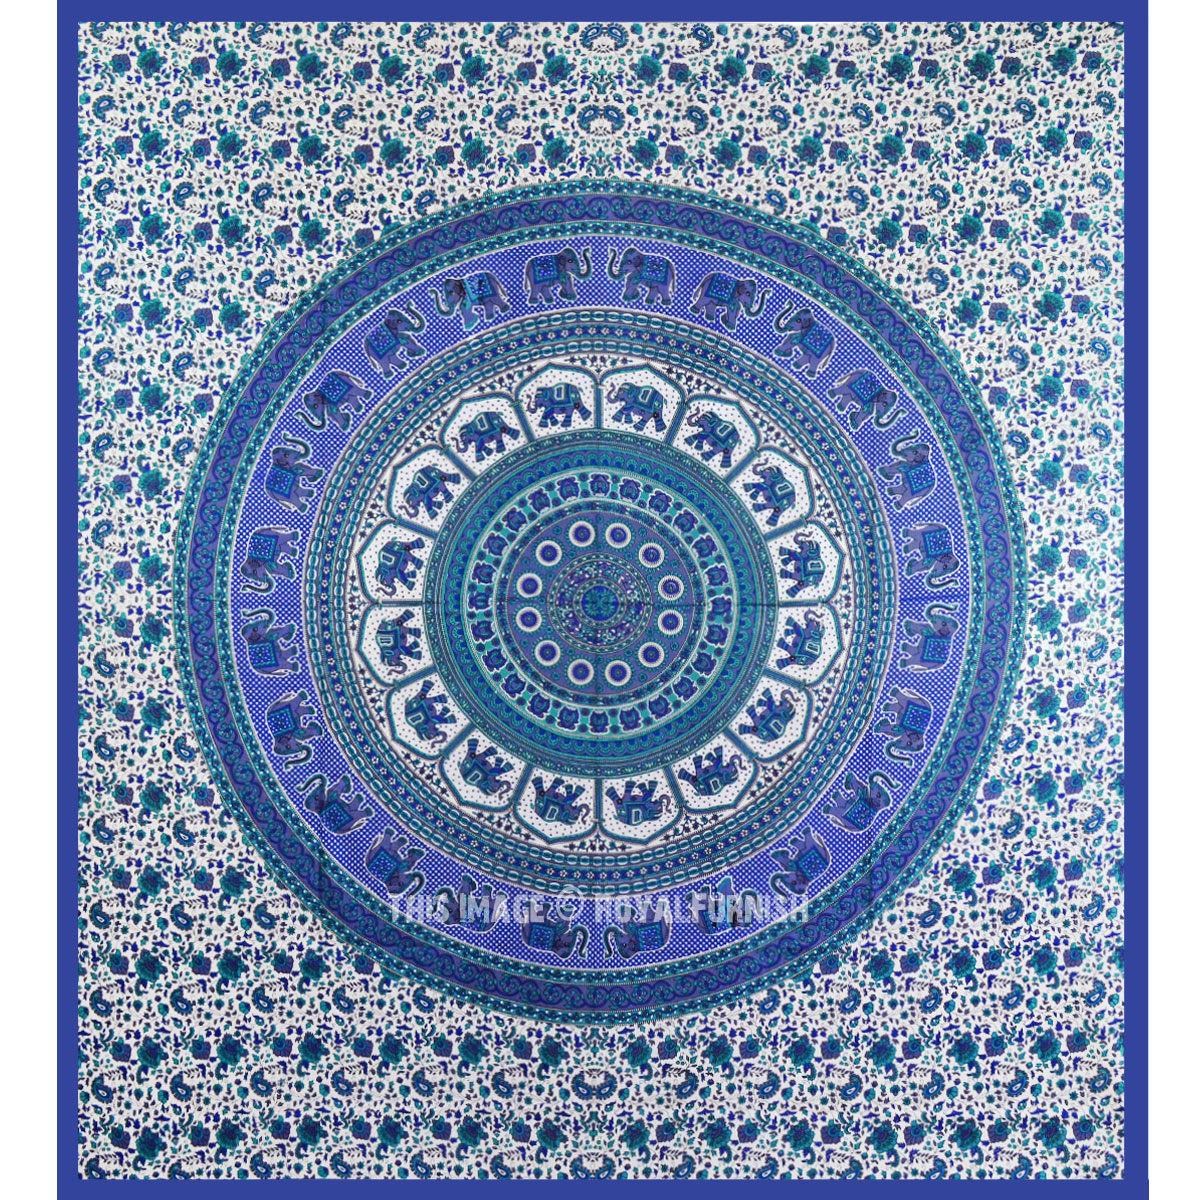 Details about   Fluorescent Fantasy Tapestry Wall Hanging Mandala Bedspread Indian Poster